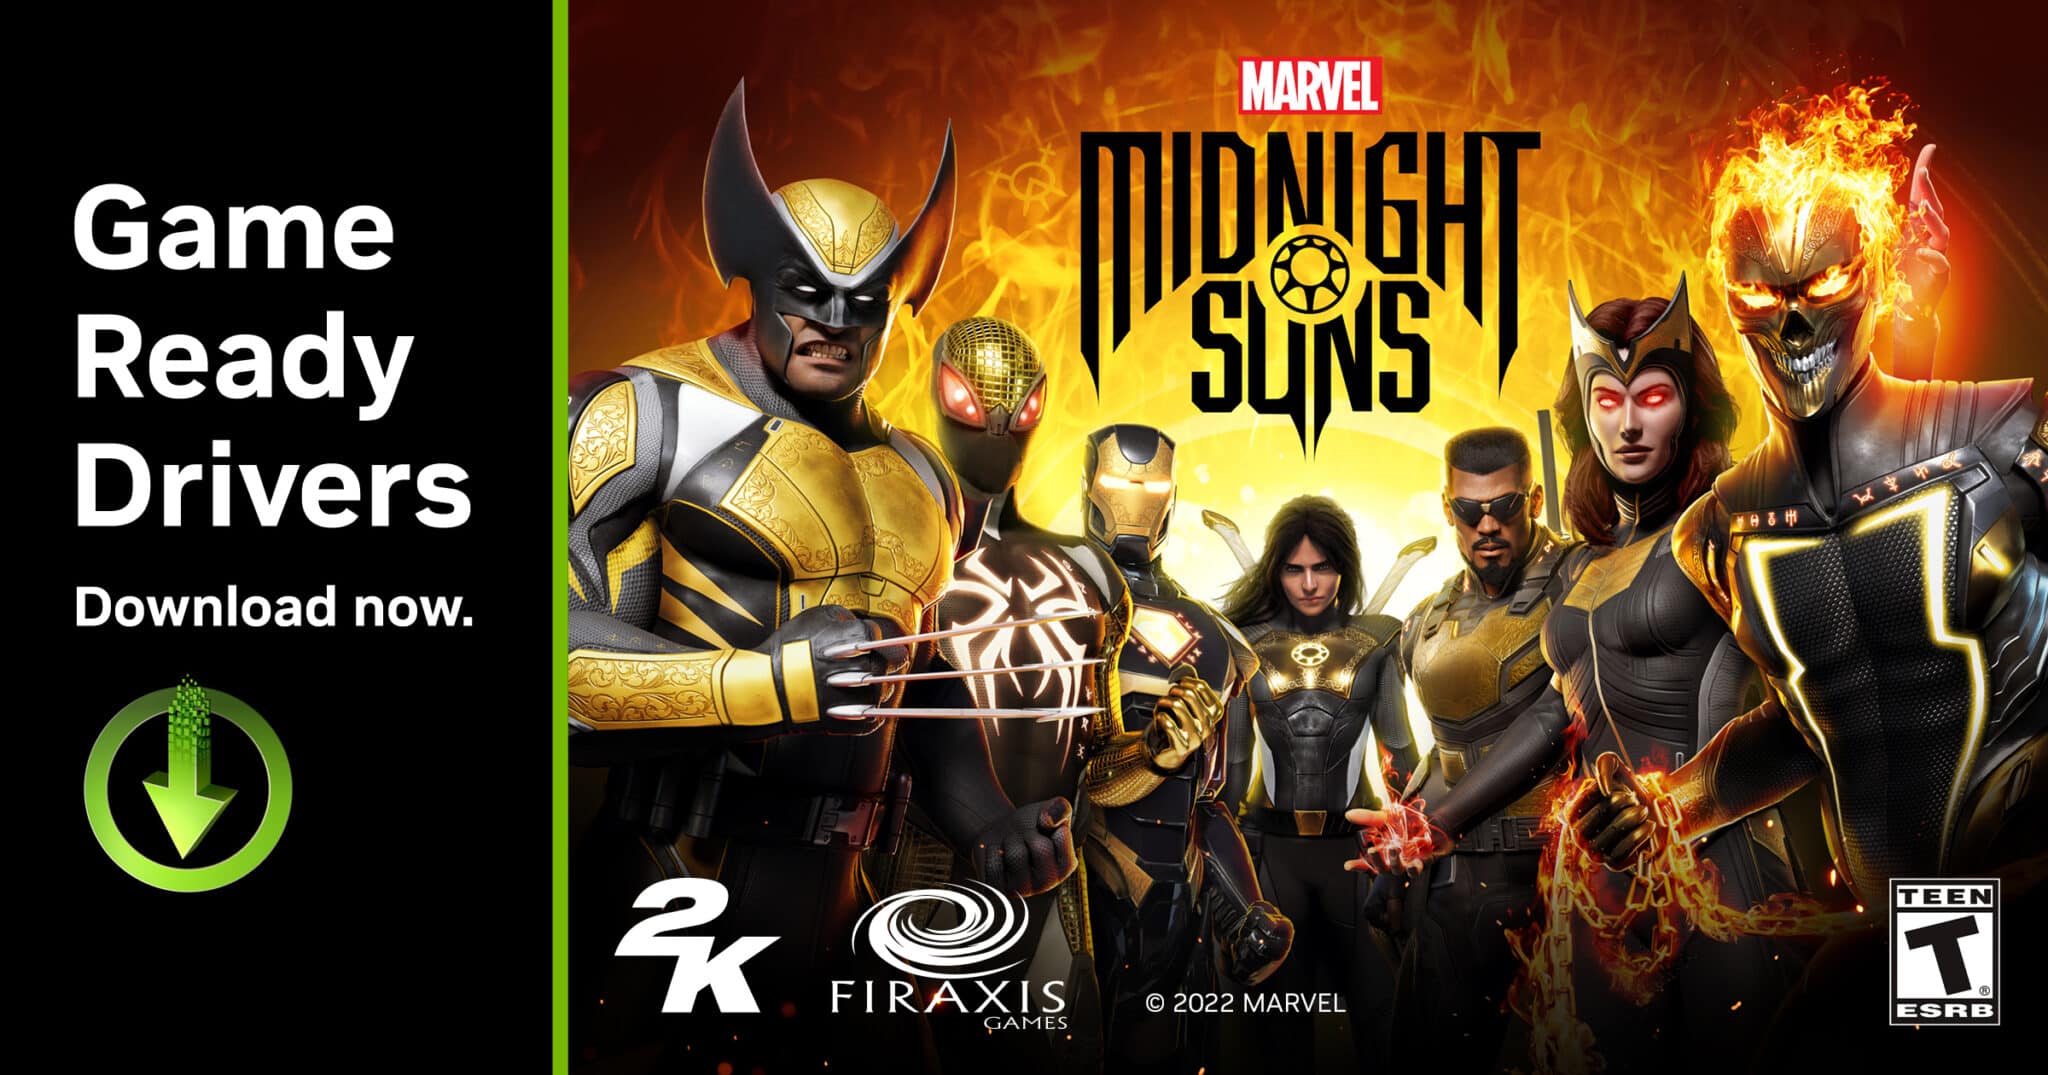 nvidia geforce game ready driver marvels midnight suns keyvisual